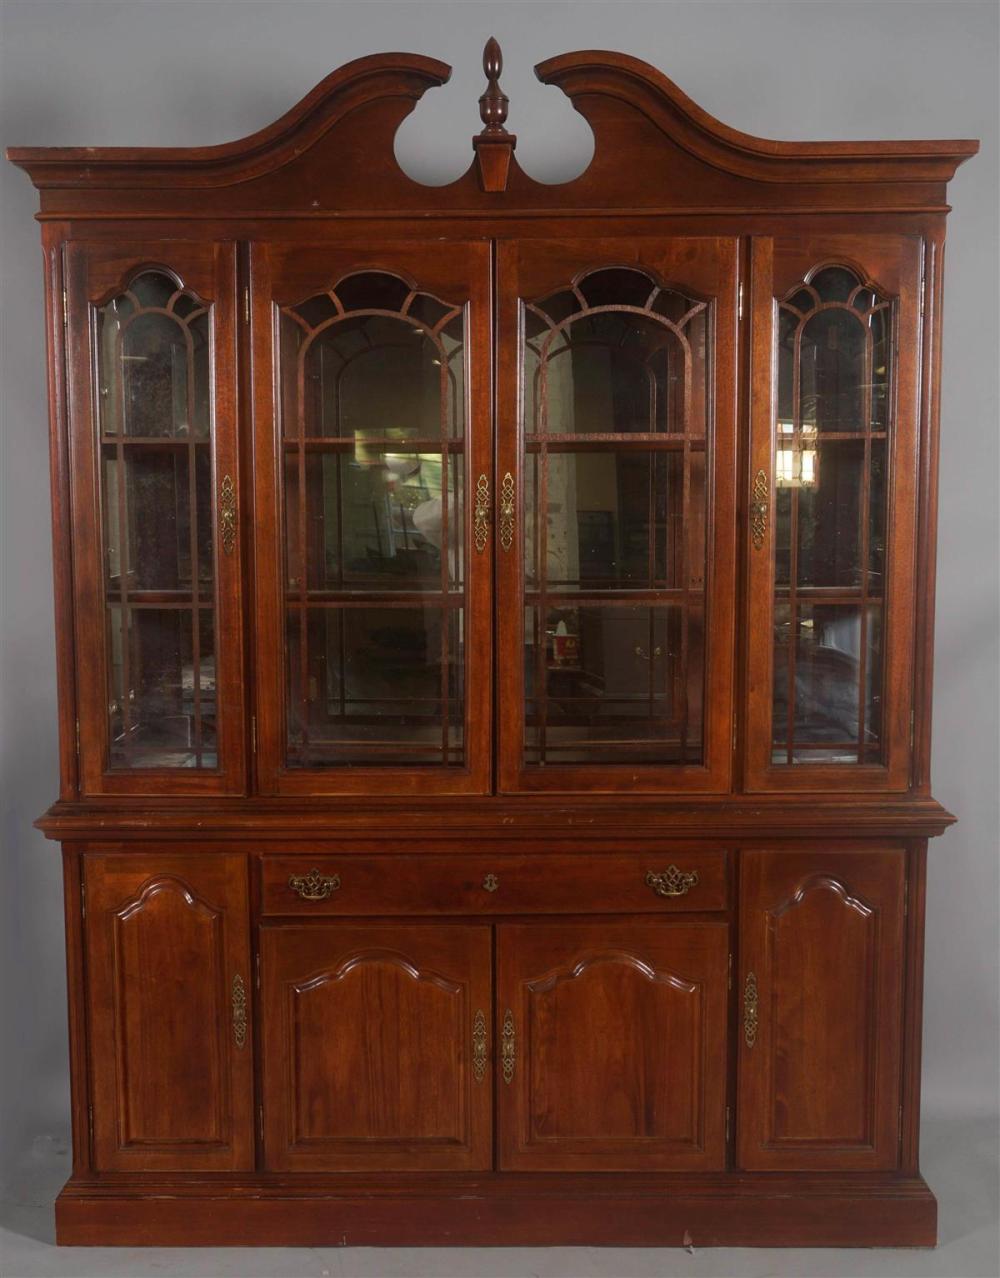 MODERN MAHOGANY CHIPPENDALE STYLE 33c641